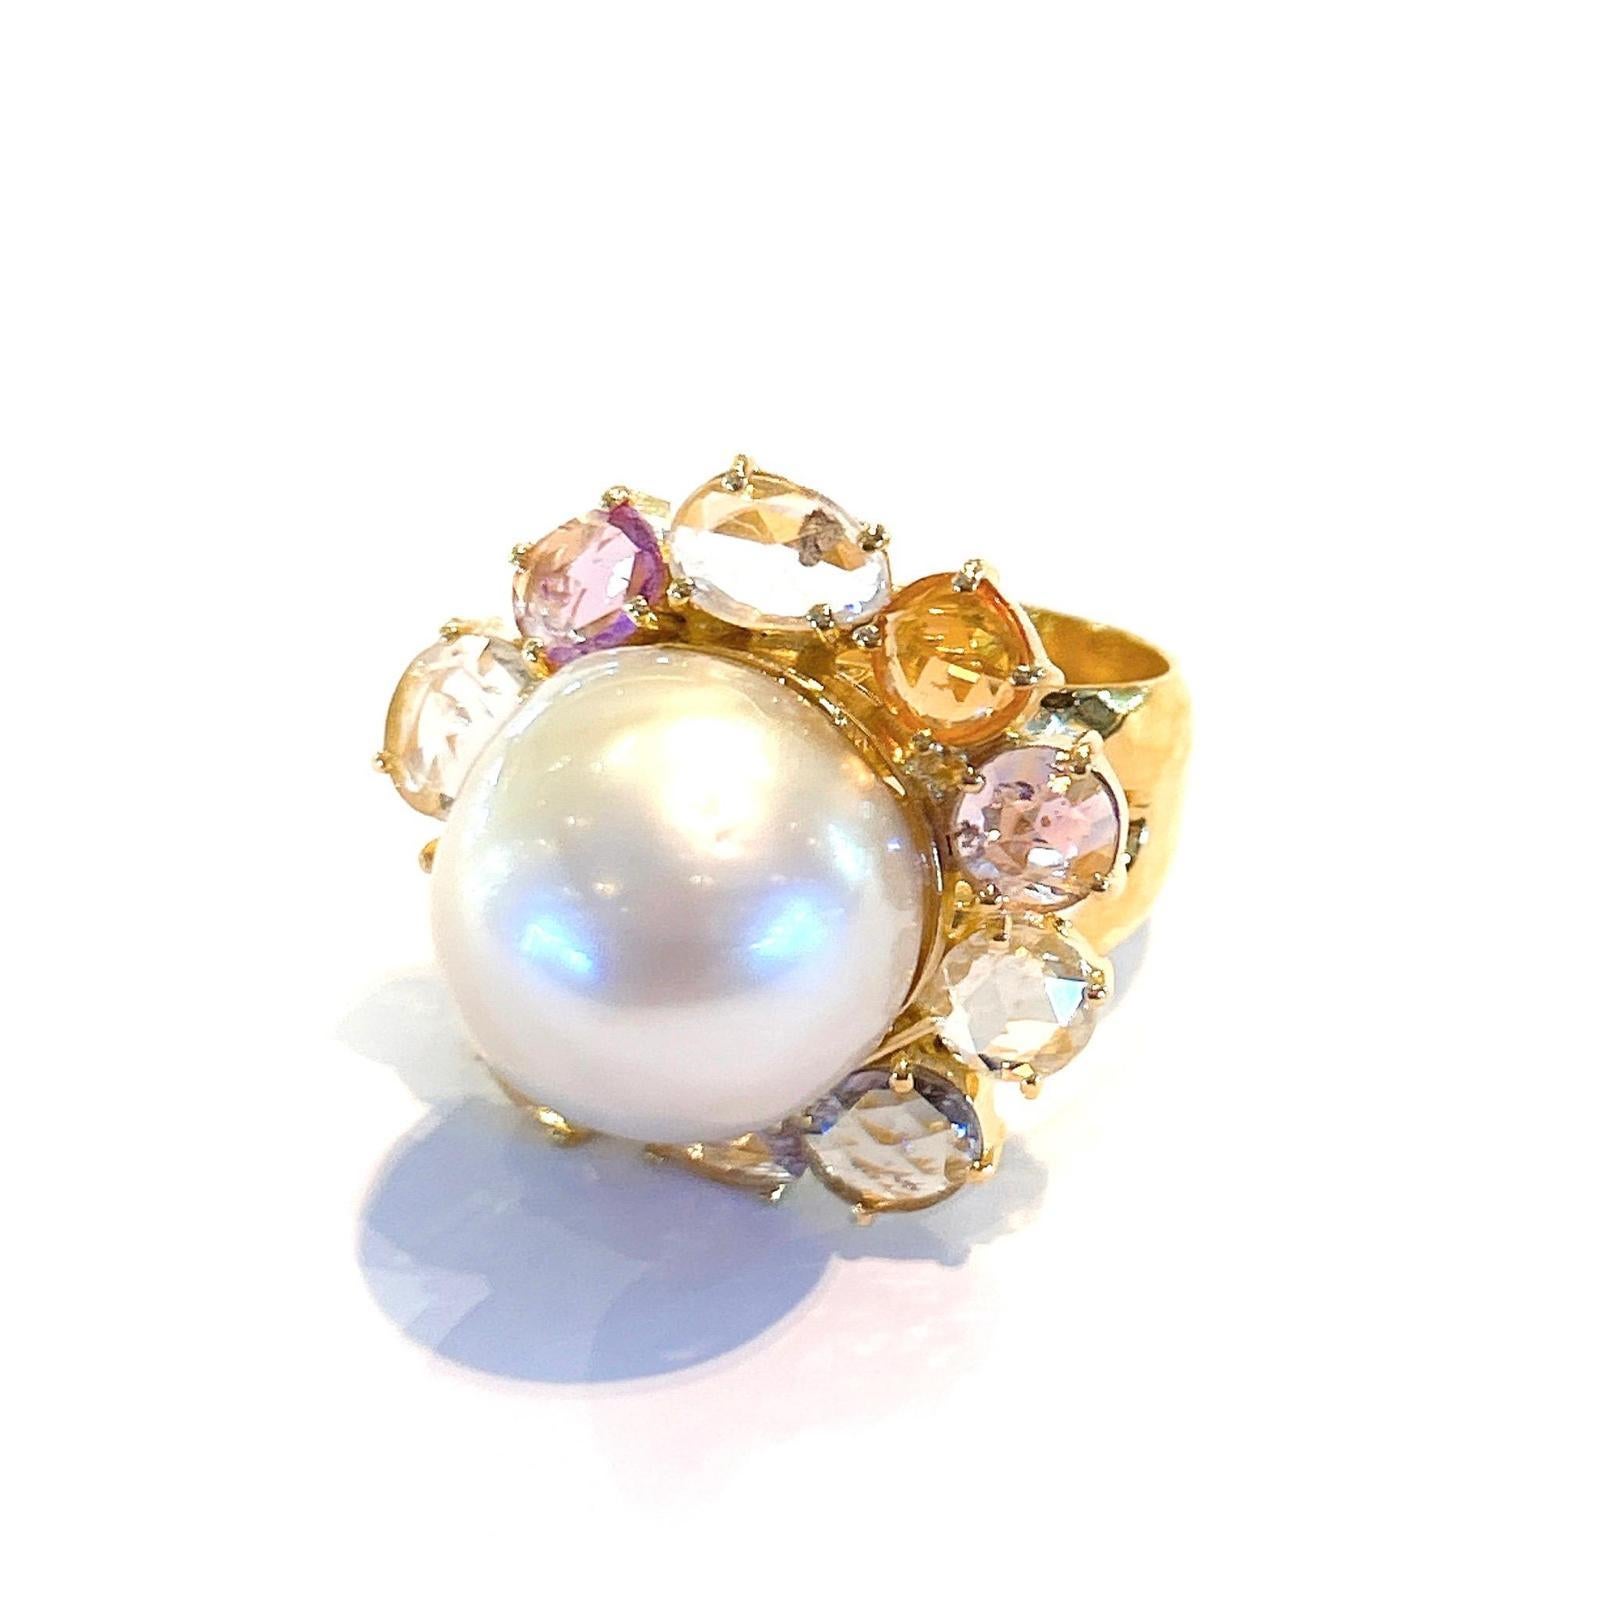 Bochic “Capri” Pearl & Multi Color Rose Cut Sapphires Set In 18K Gold & Silver 
Round white pearl with pink tone 
Multi fancy colors sapphires from Sri Lanka
Rose cut round and oval shapes 
Colors are beautiful pastels - Light Pink, Golden, Rose,